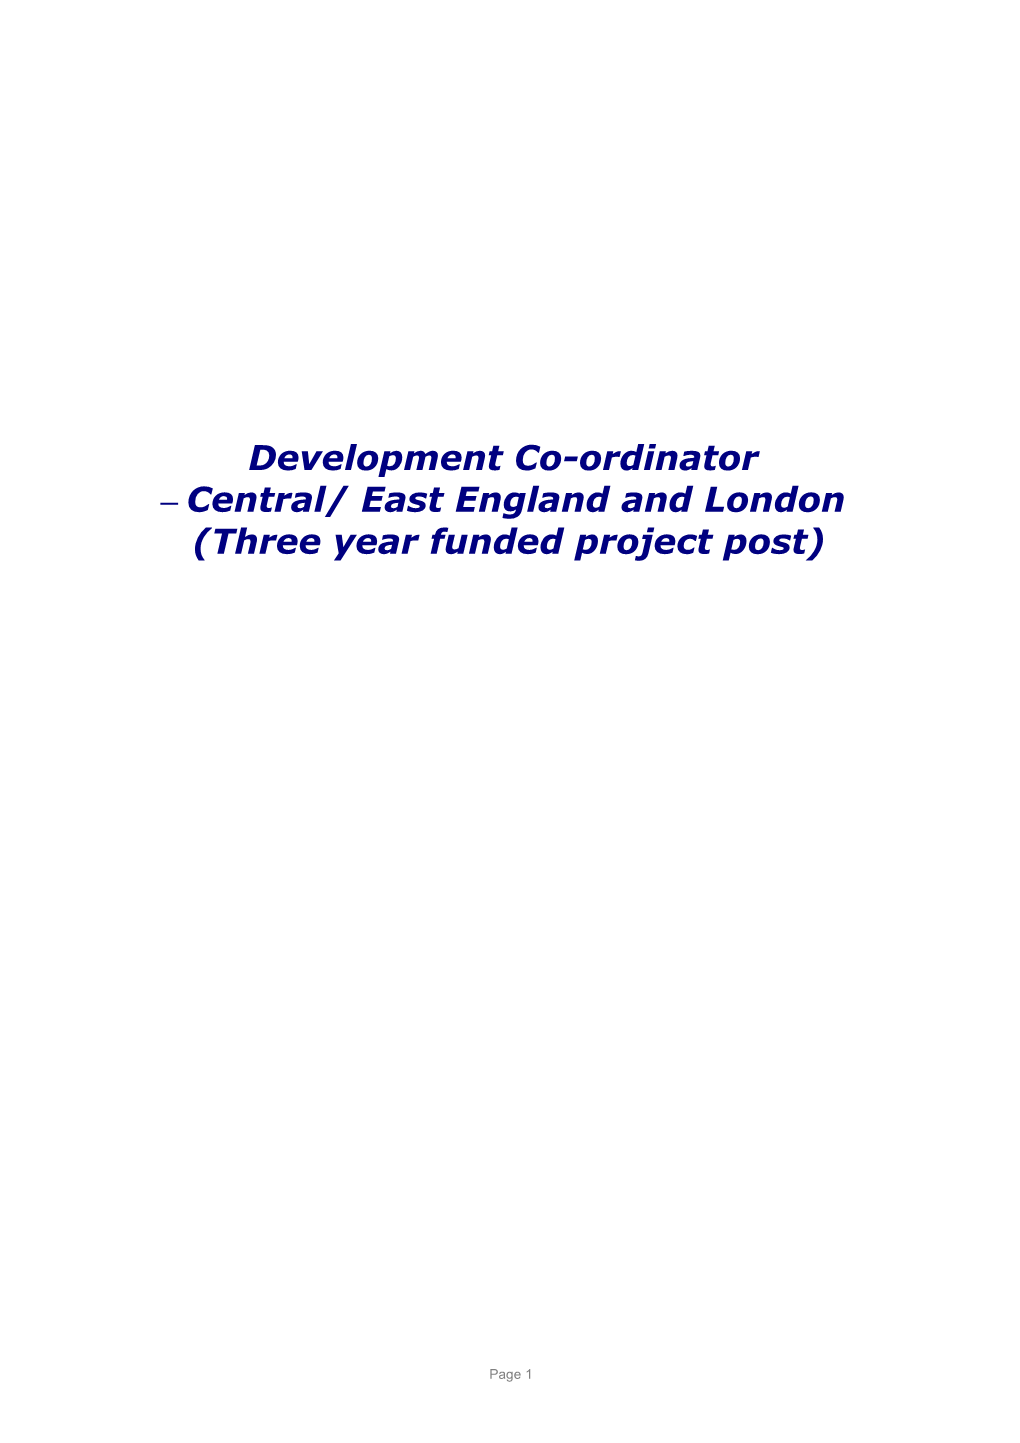 Three Year Funded Project Post